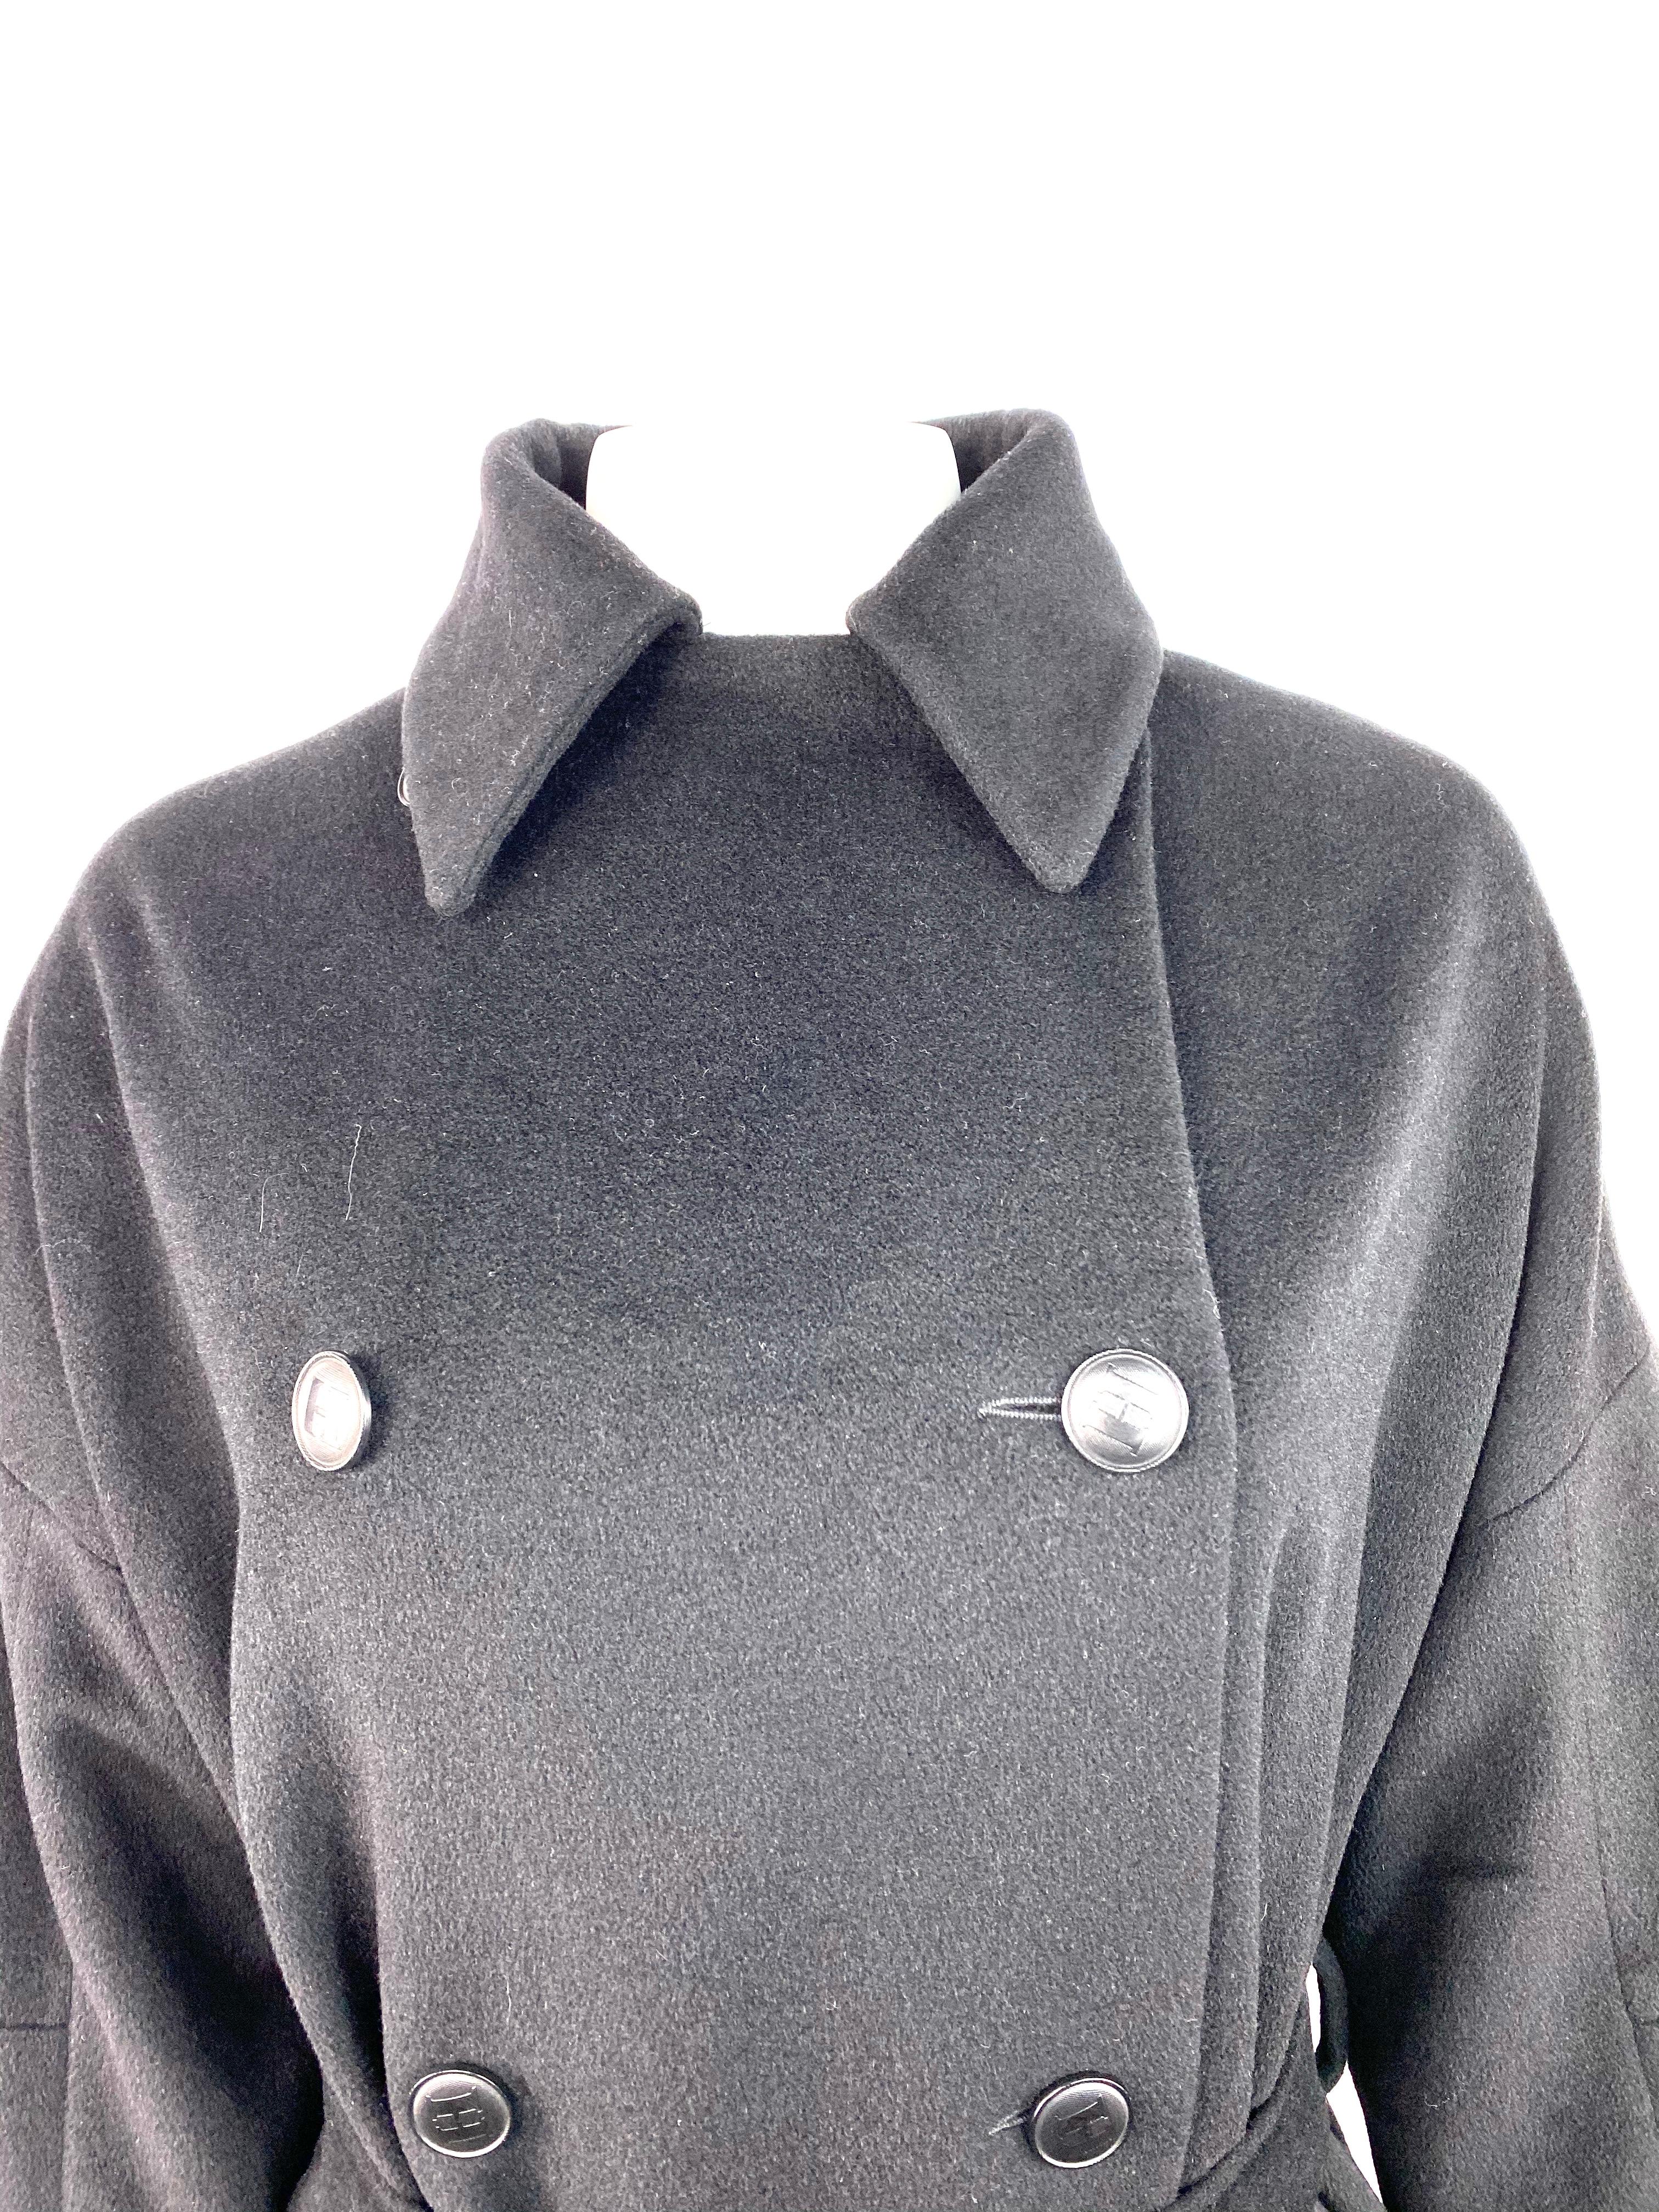 Product details:

Featuring black cashmere with collar, front eight black H stamped buttons closure, dual zipped pockets and belt detail.
Made in France.